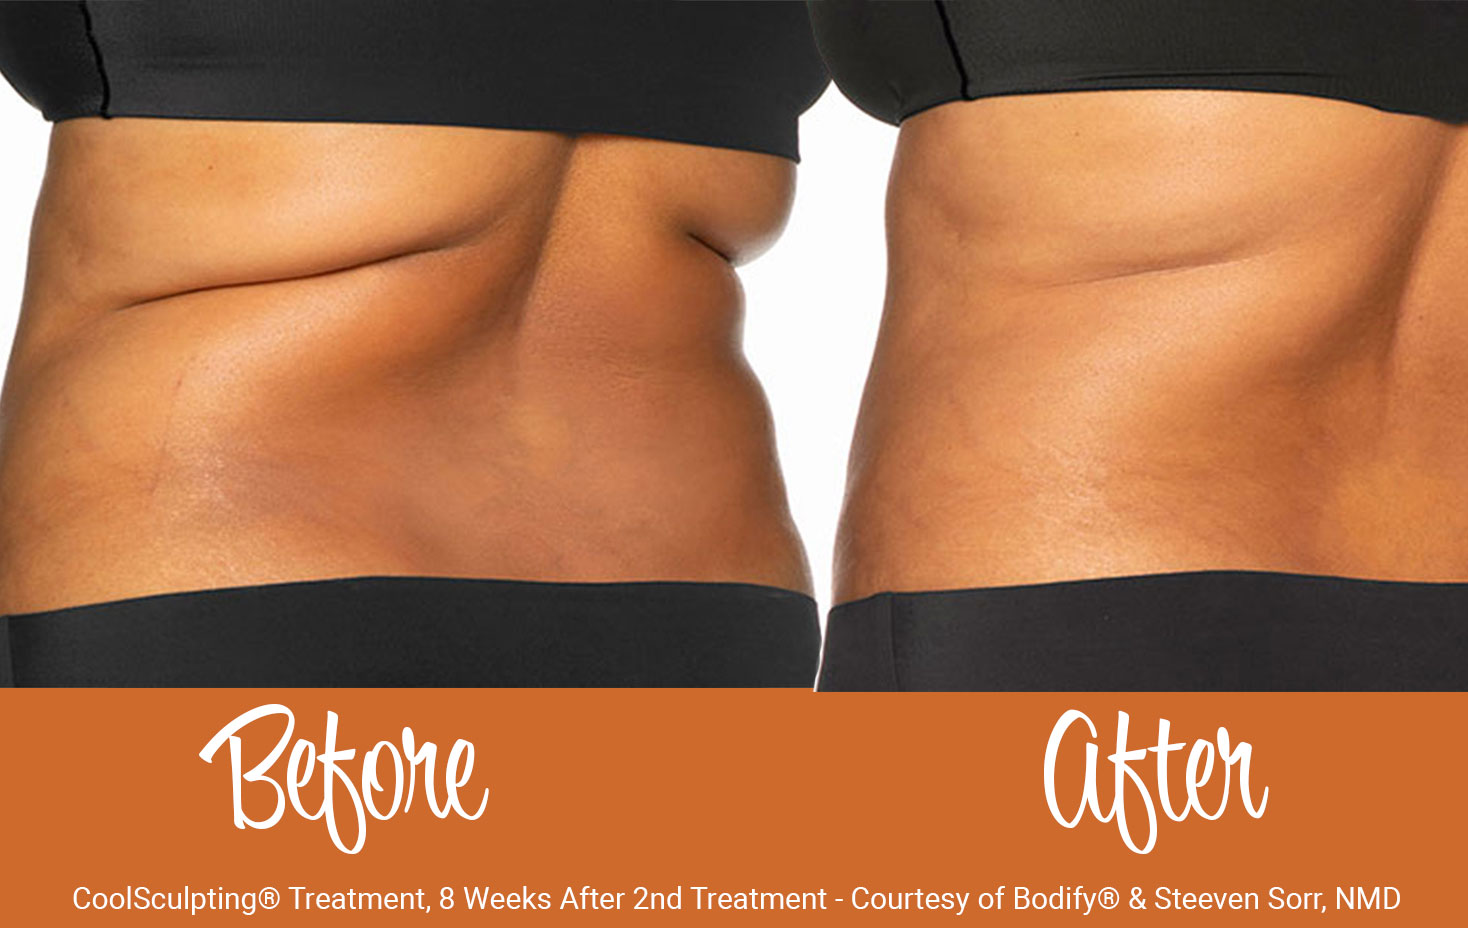 Before and after CoolSculpting® treatment on back